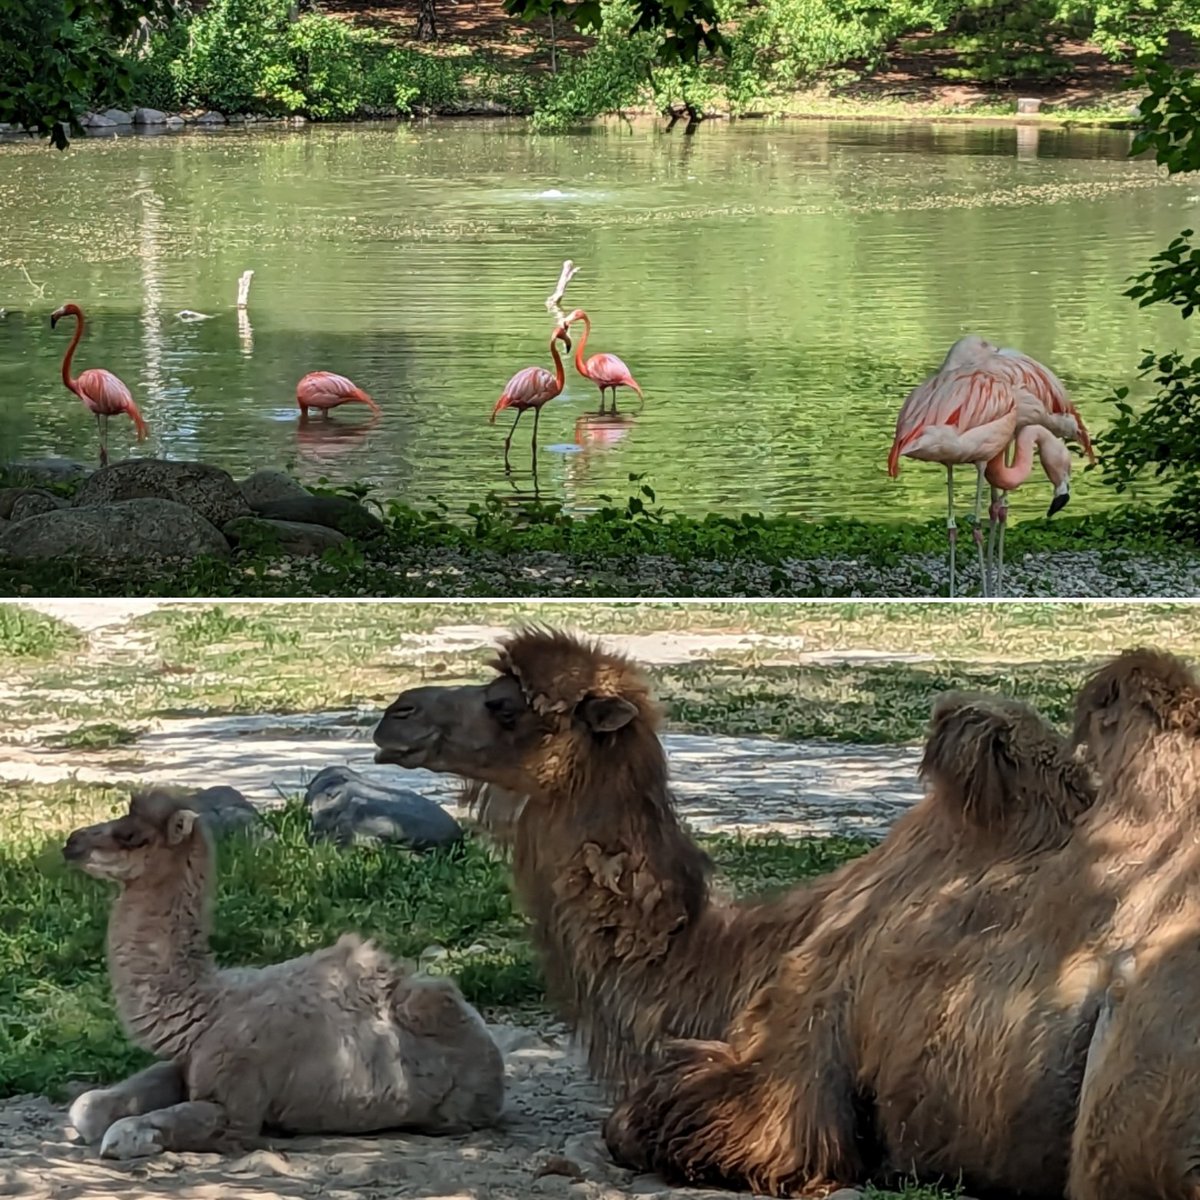 Took a field trip to the Milwaukee Zoo today! Lots of fun and beautiful weather! 

Follow us on Facebook & Instagram!
#angelbdesigns4you #tags #gifttags #cards #greetingcards #scrapbook #scrapbooking #scrapbooklayout #photoalbum #handmade #smallbusiness #zoo #zooanimals #mkezoo